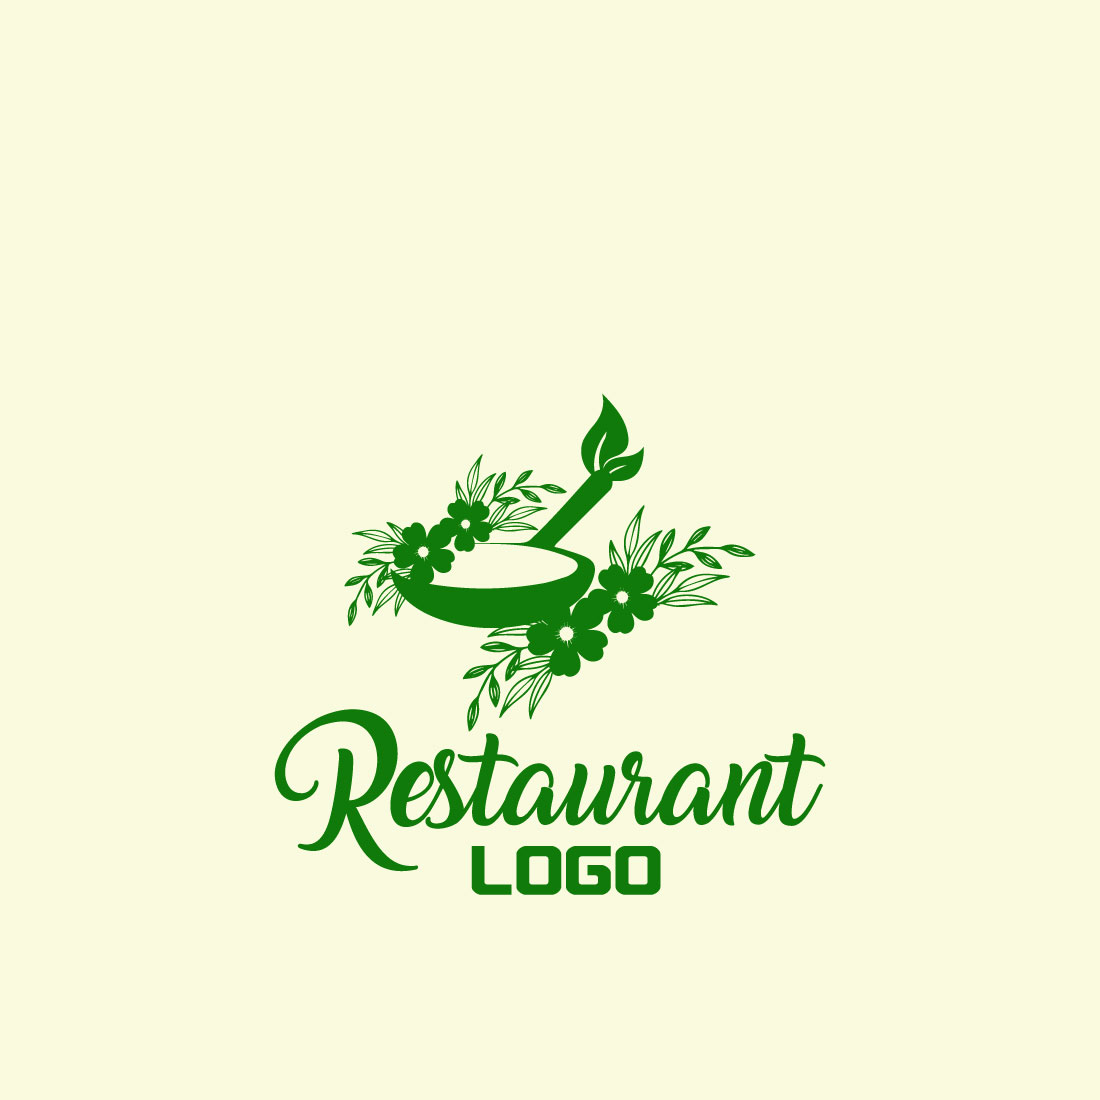 Free Floral Cooking Logo cover image.